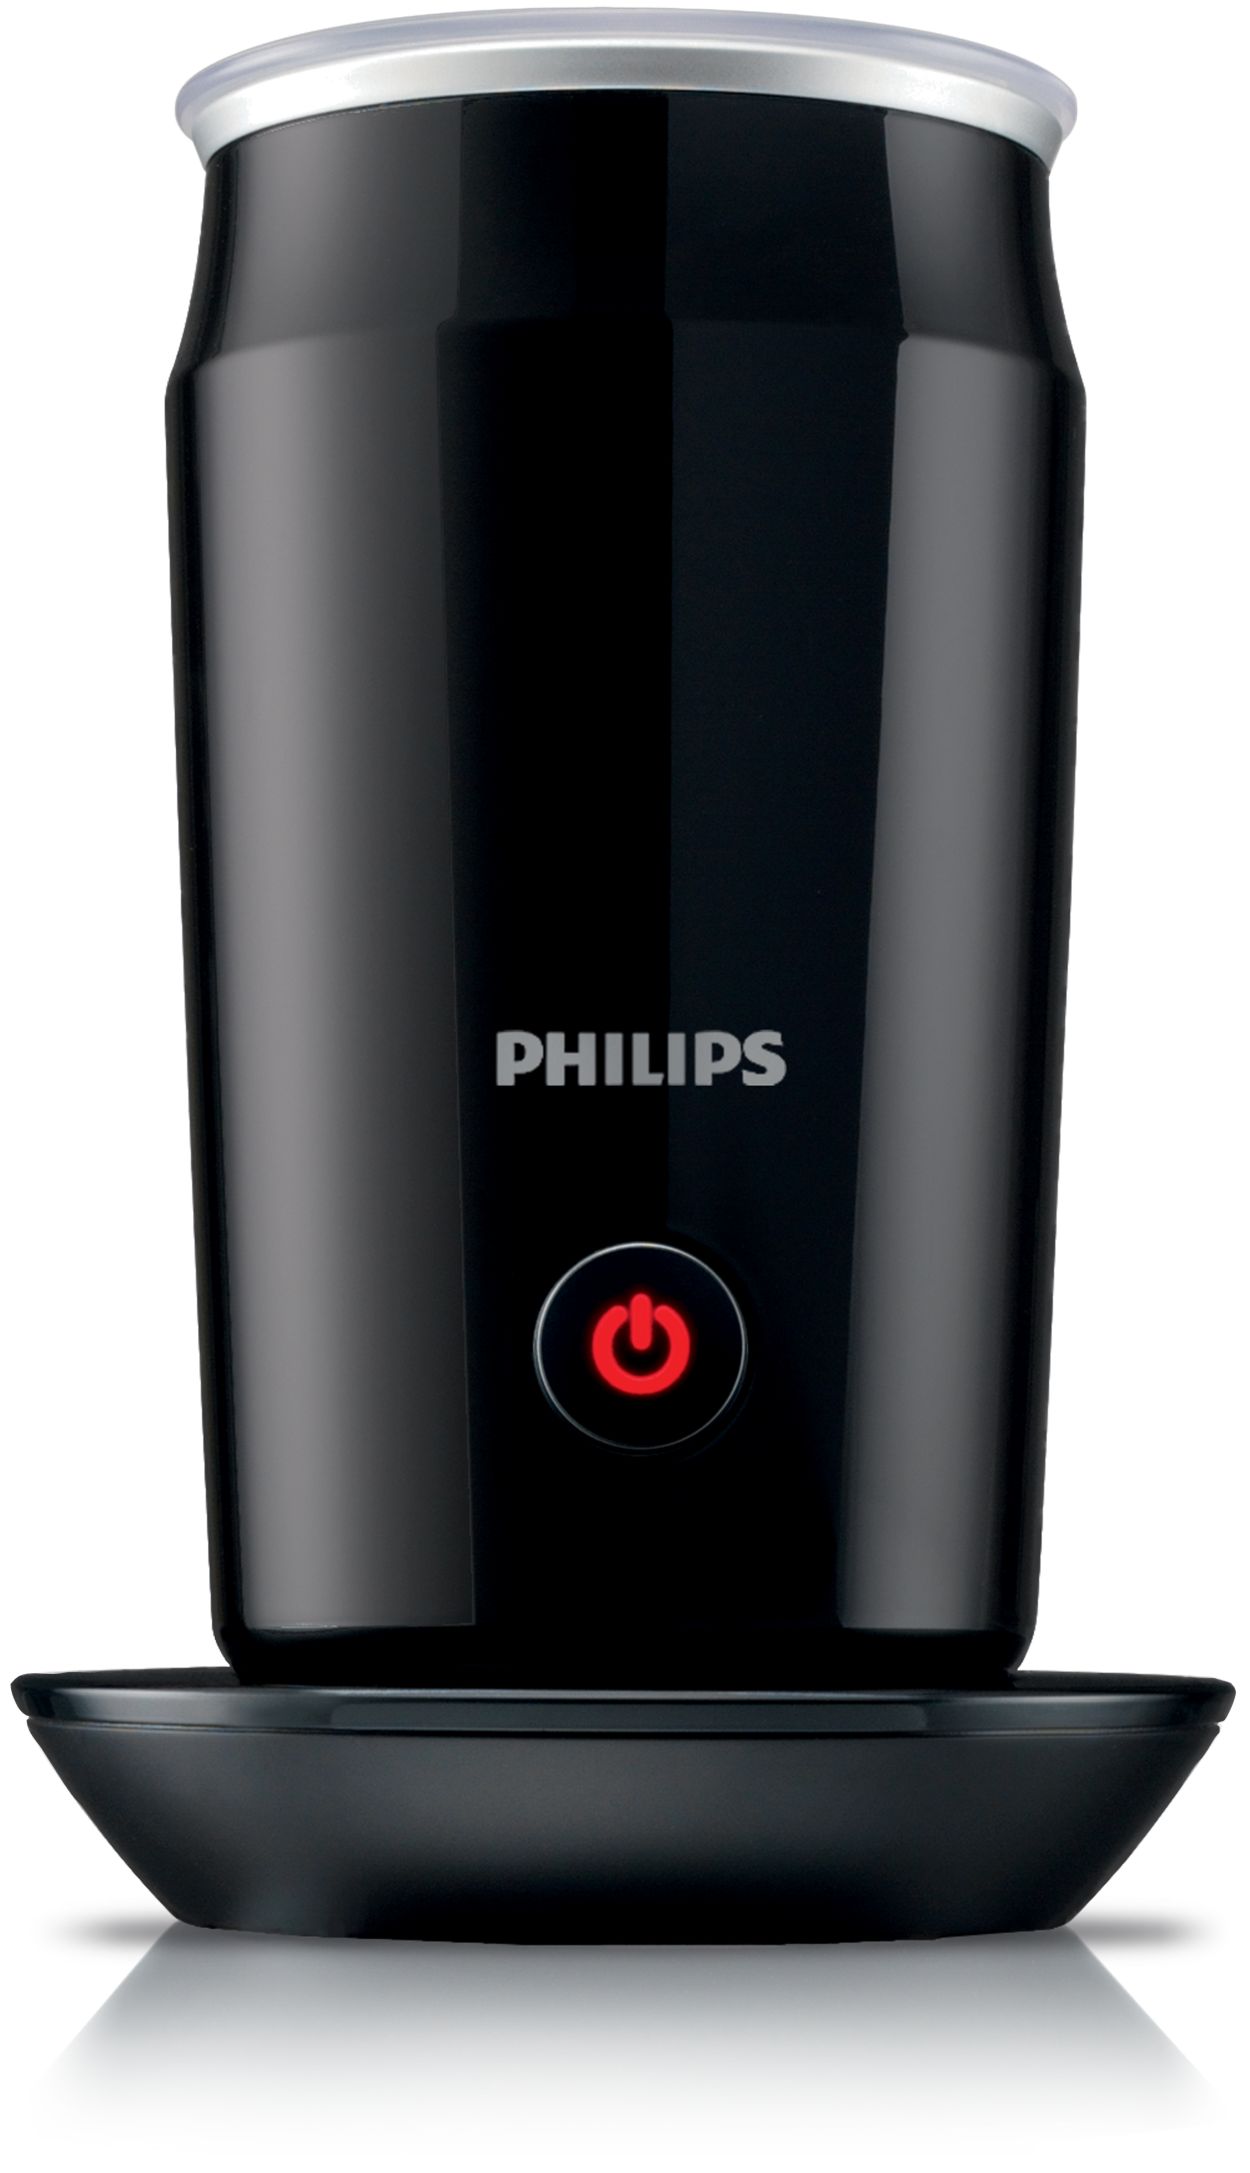 https://images.philips.com/is/image/philipsconsumer/7be68cfd9c754a738966ad1800d45042?$jpglarge$&wid=1250